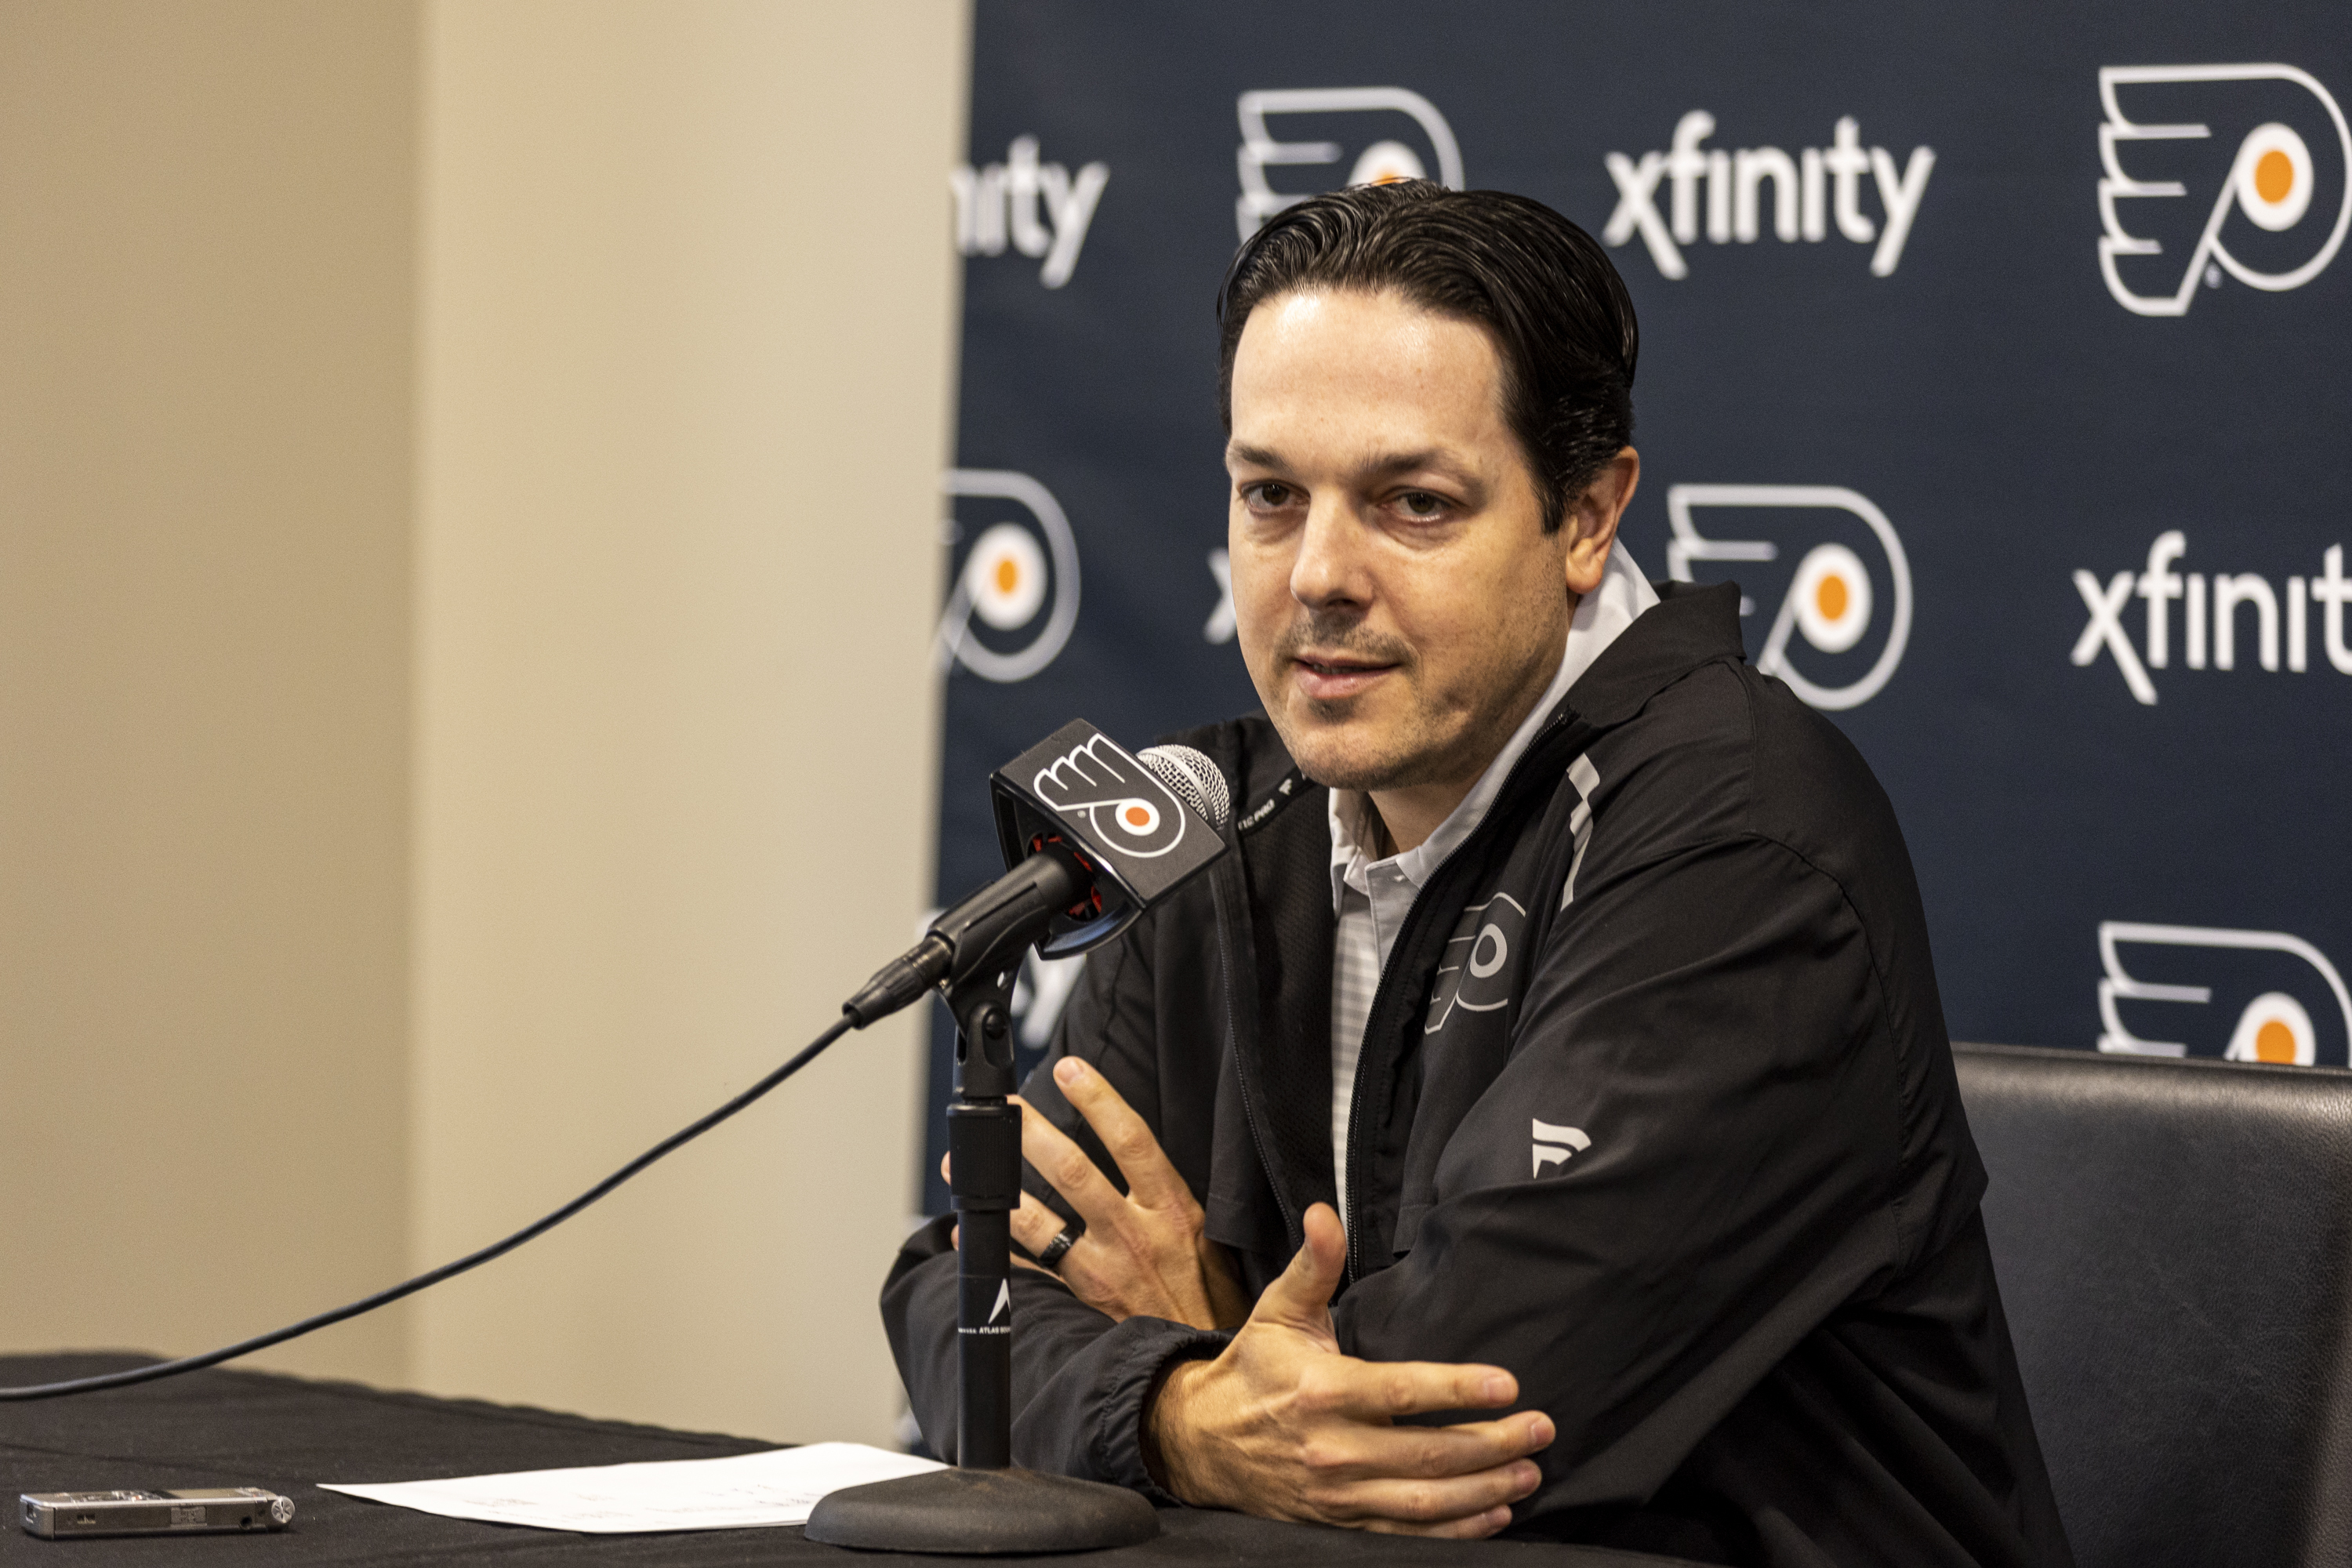 Former Flyer Danny Briere finds new life reviving the Mariners of Maine